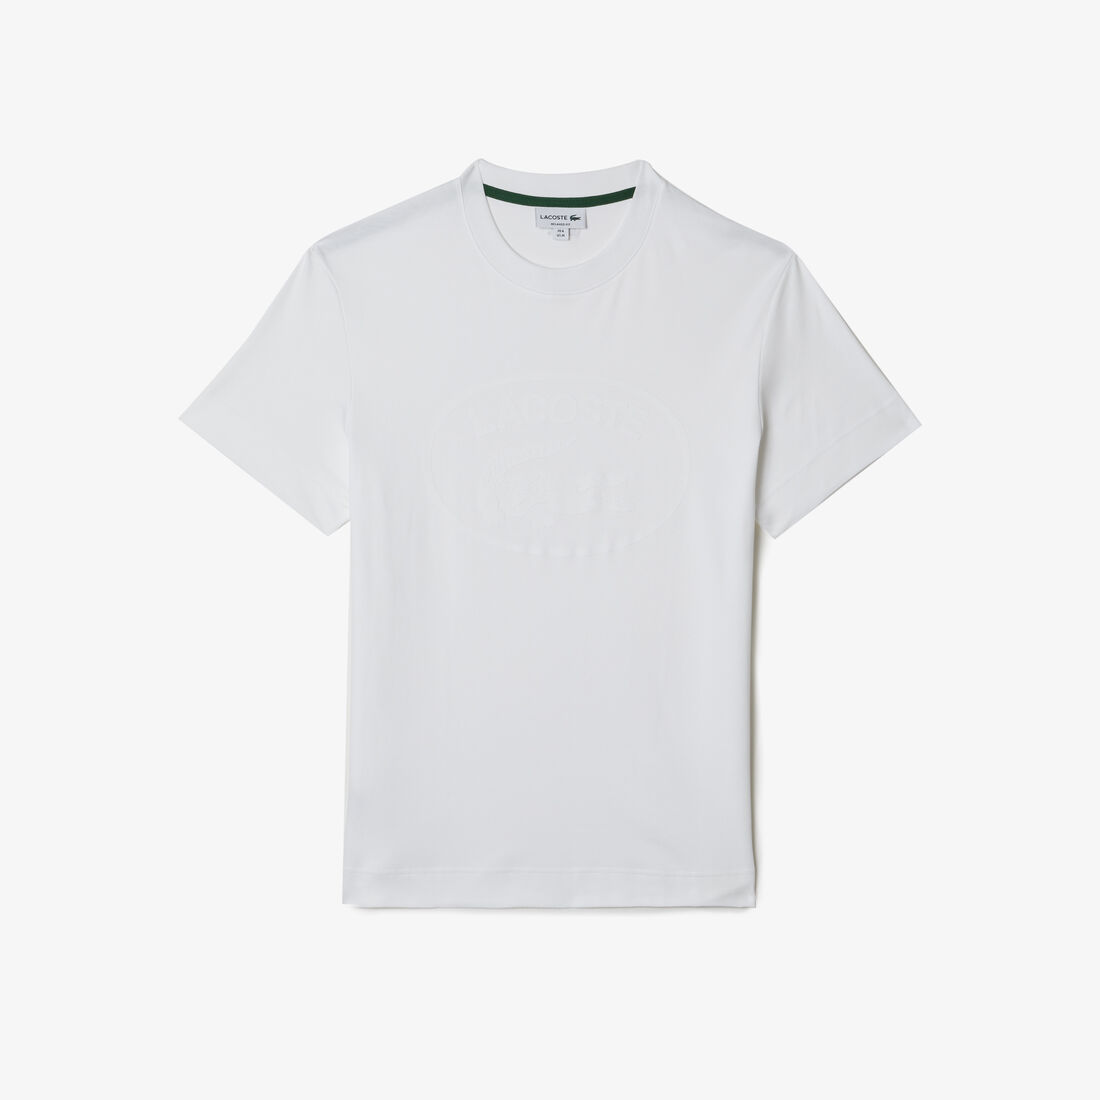 Lacoste Relaxed Fit Tone-on-tone Branded Baumwoll T-shirts Herren Weiß | VRMH-34209